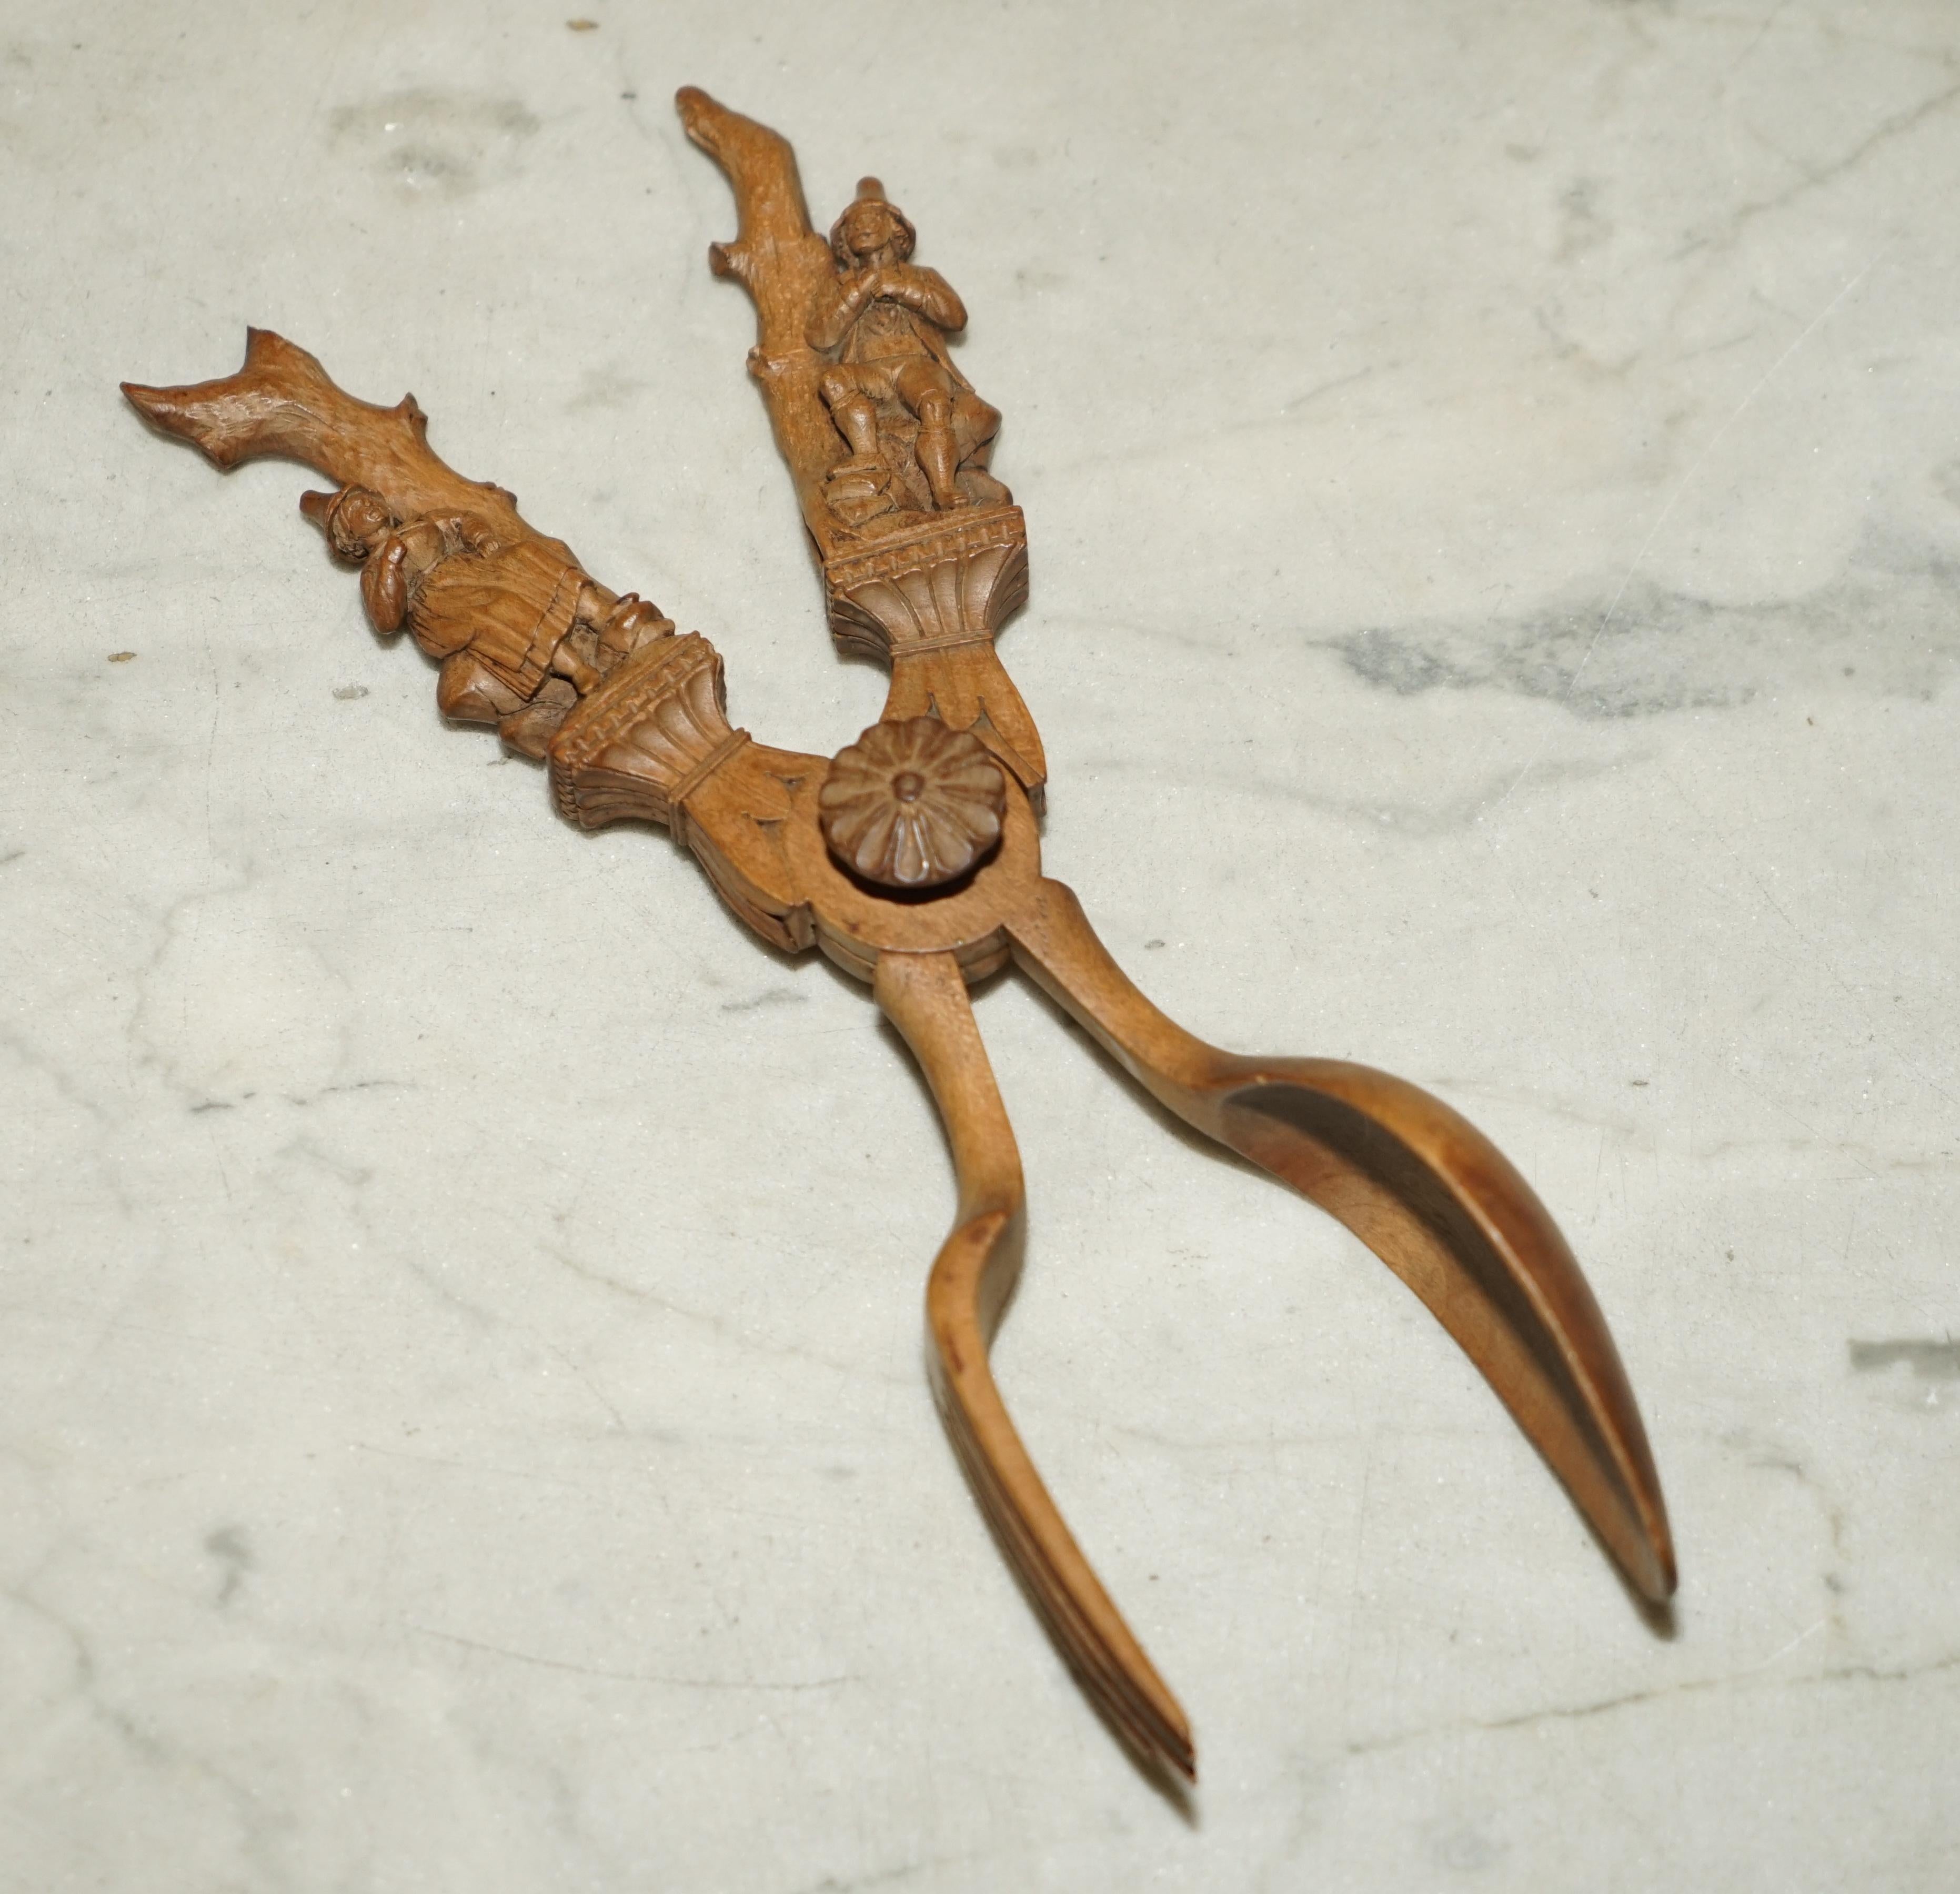 We are delighted to offer for sale this lovely ornately carved Austrian salad spoon and fork combo

A good looking and well made piece in walnut, the handles are super finely carved as you can see in the detailed pictures 

Condition wise we